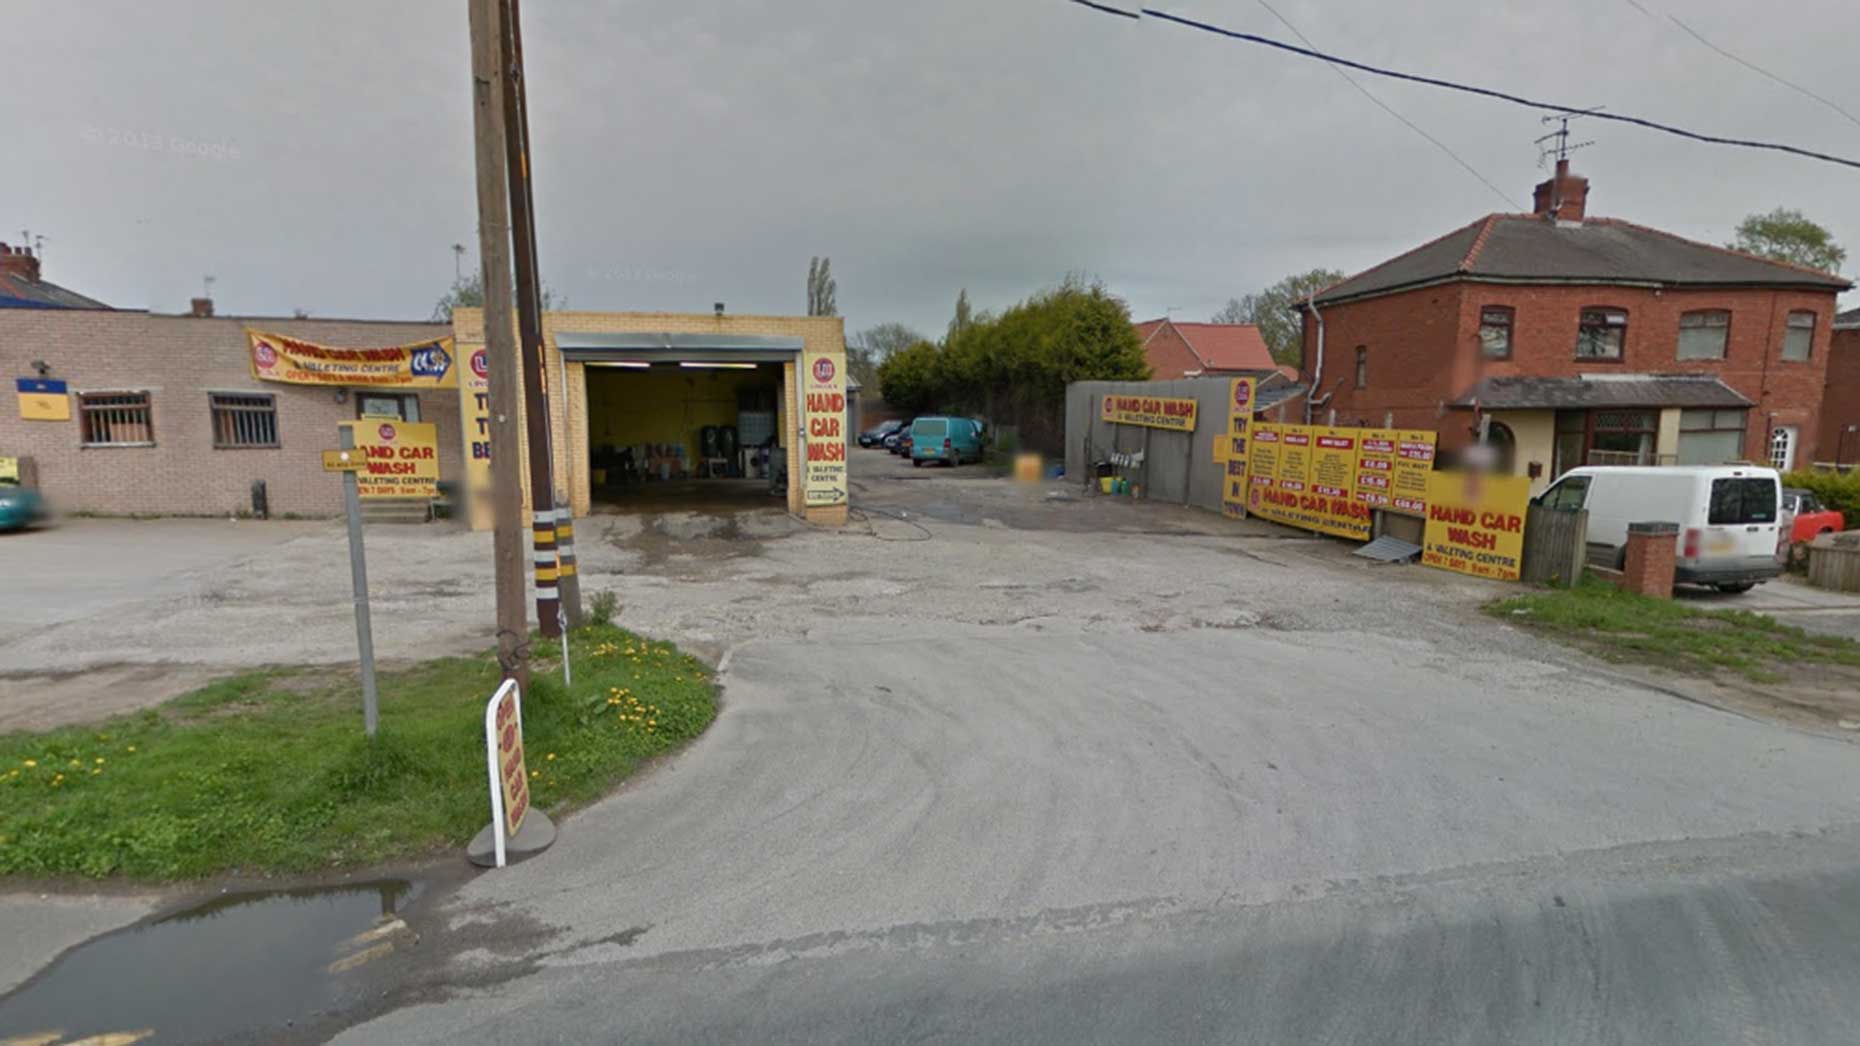 The car wash is situated behind the Jet garage on Newark Road. Photo: Google Street View